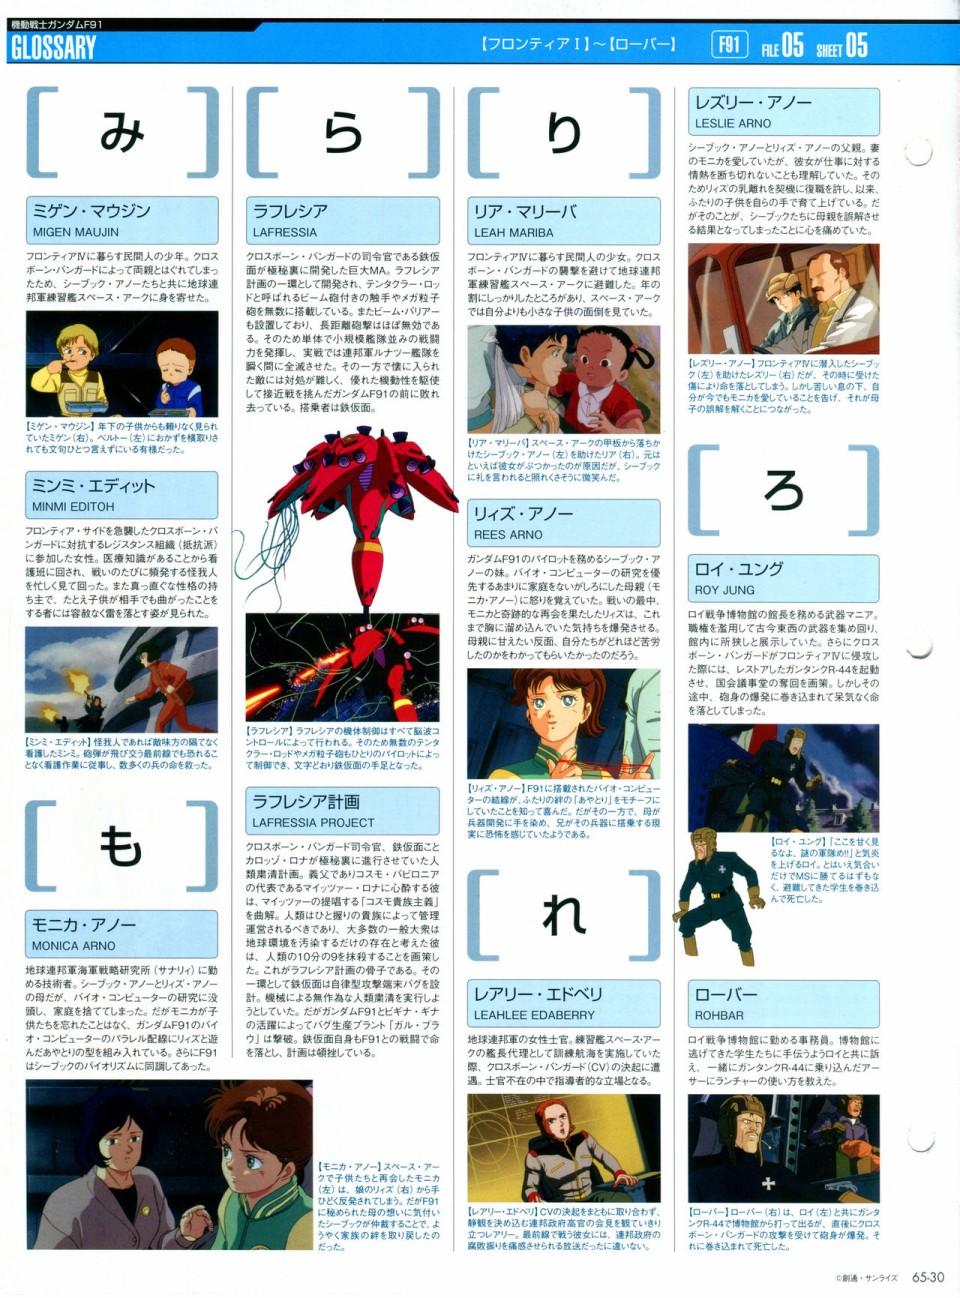 The Official Gundam Perfect File  - 第65-67話(1/3) - 2